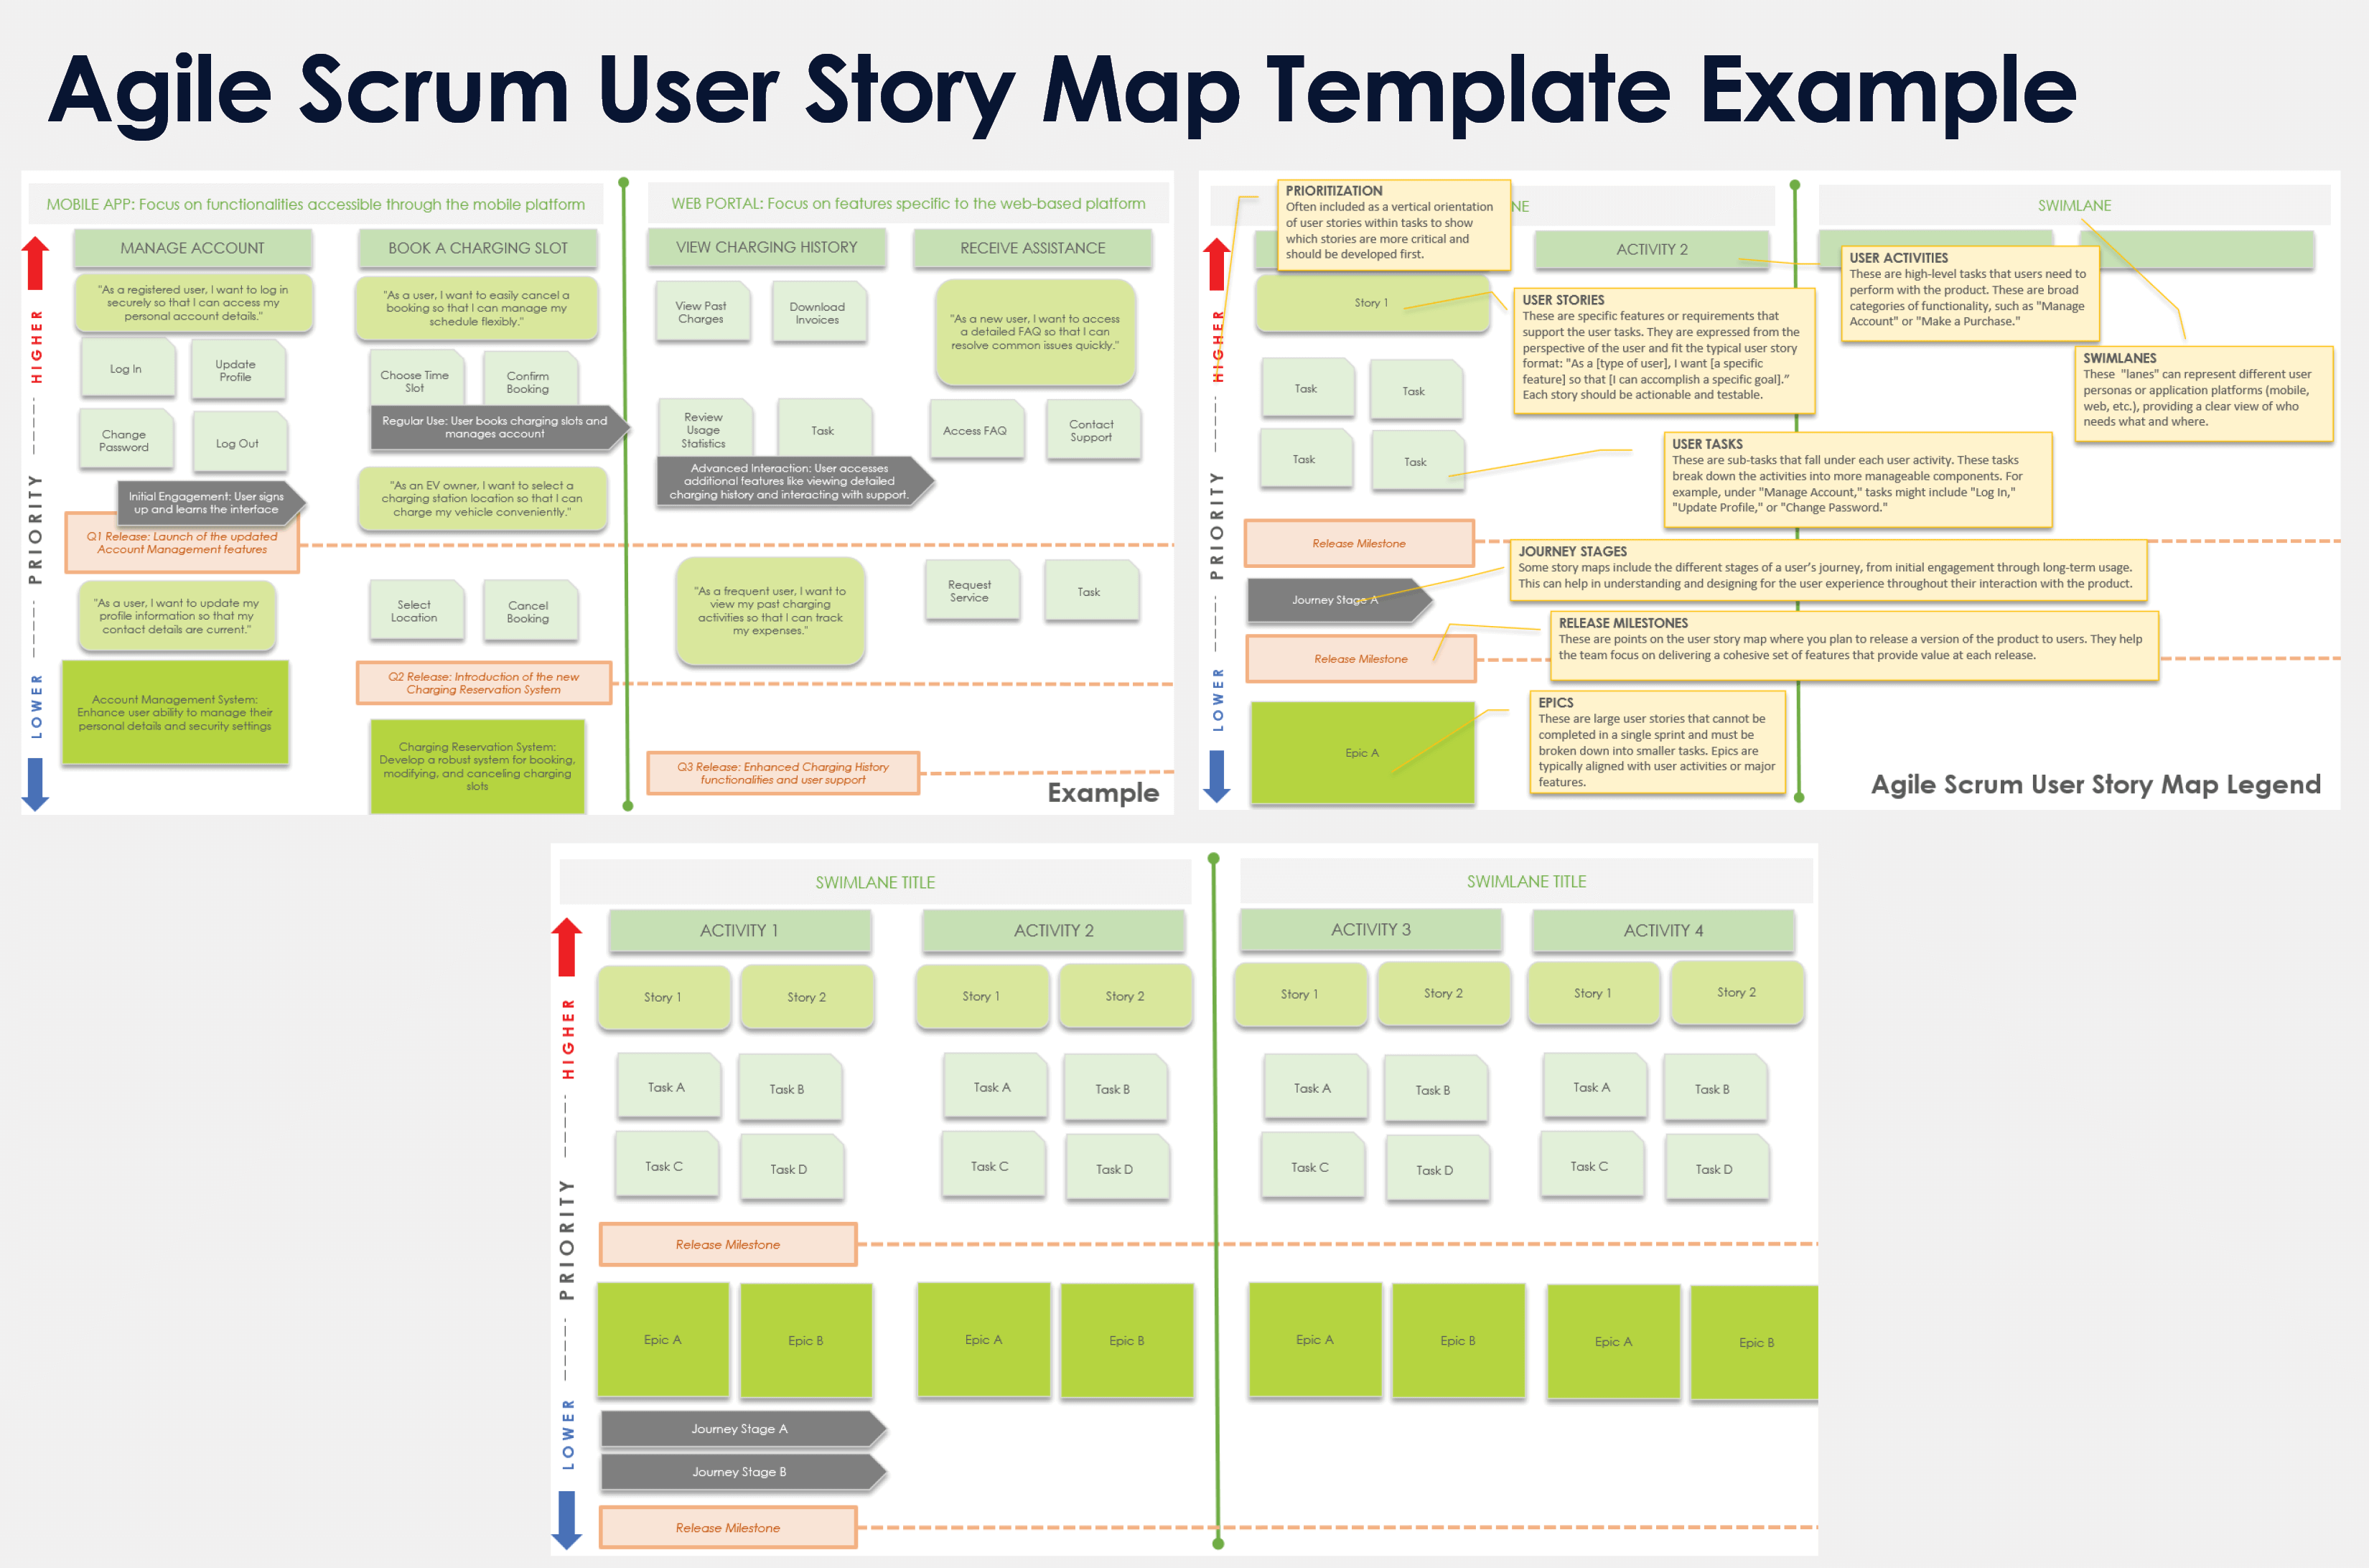 Agile Scrum User Story Map Template Example